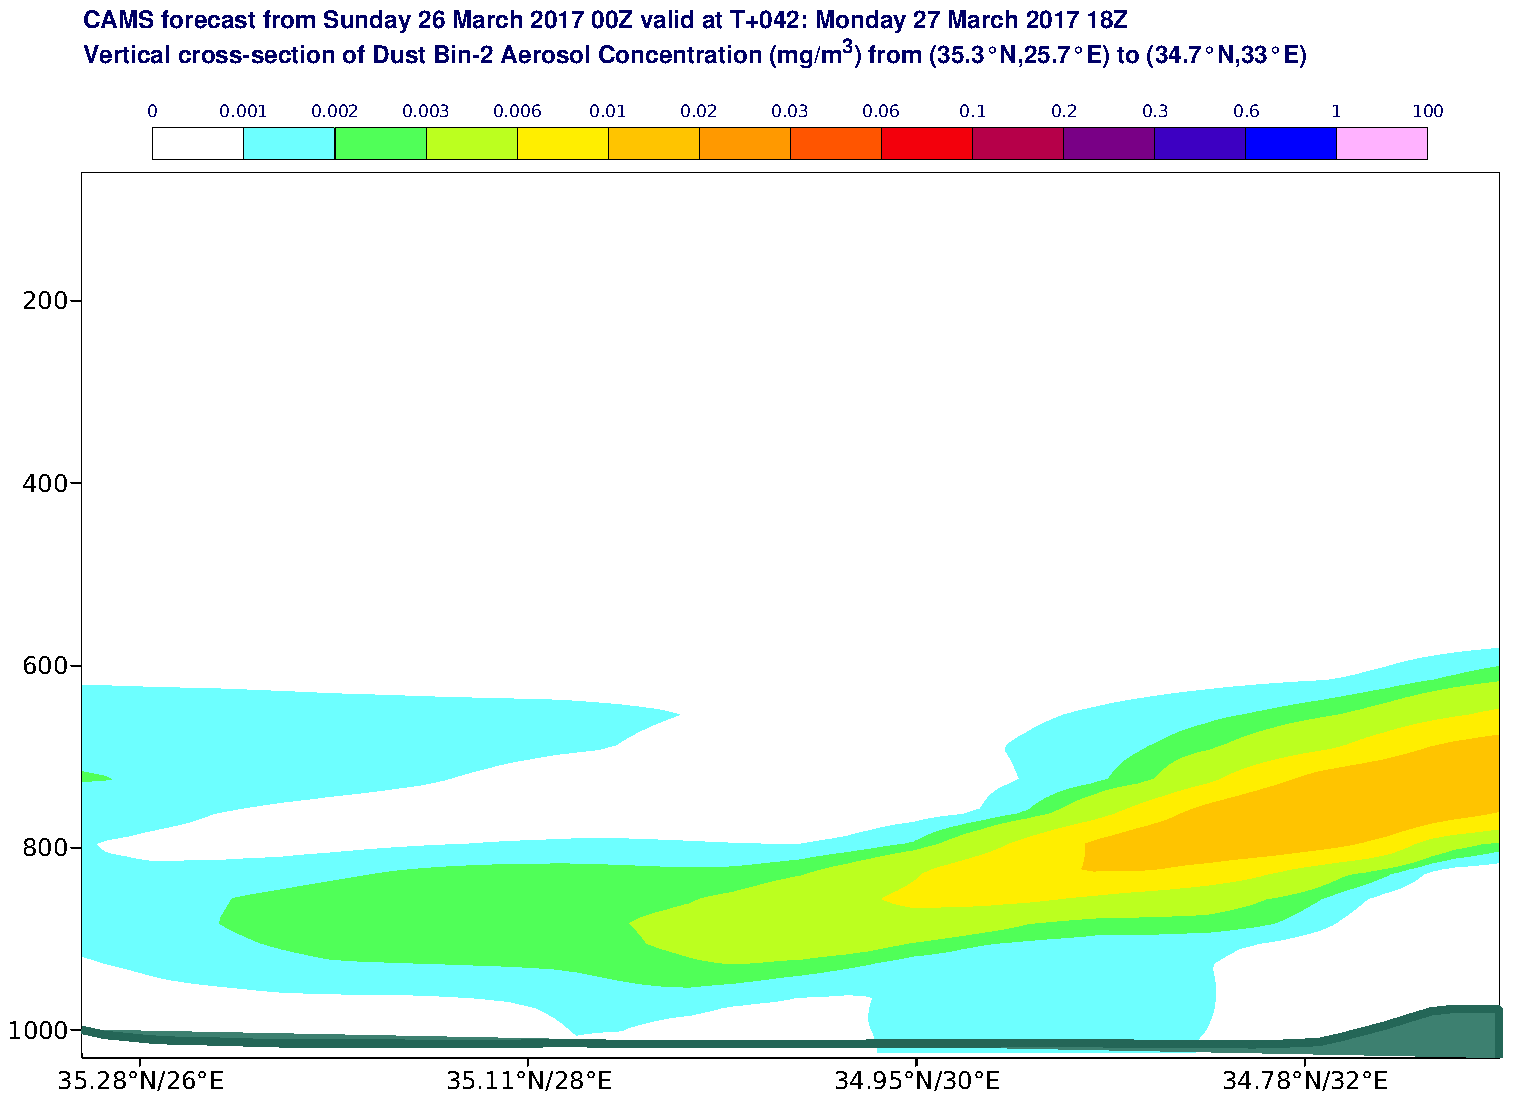 Vertical cross-section of Dust Bin-2 Aerosol Concentration (mg/m3) valid at T42 - 2017-03-27 18:00